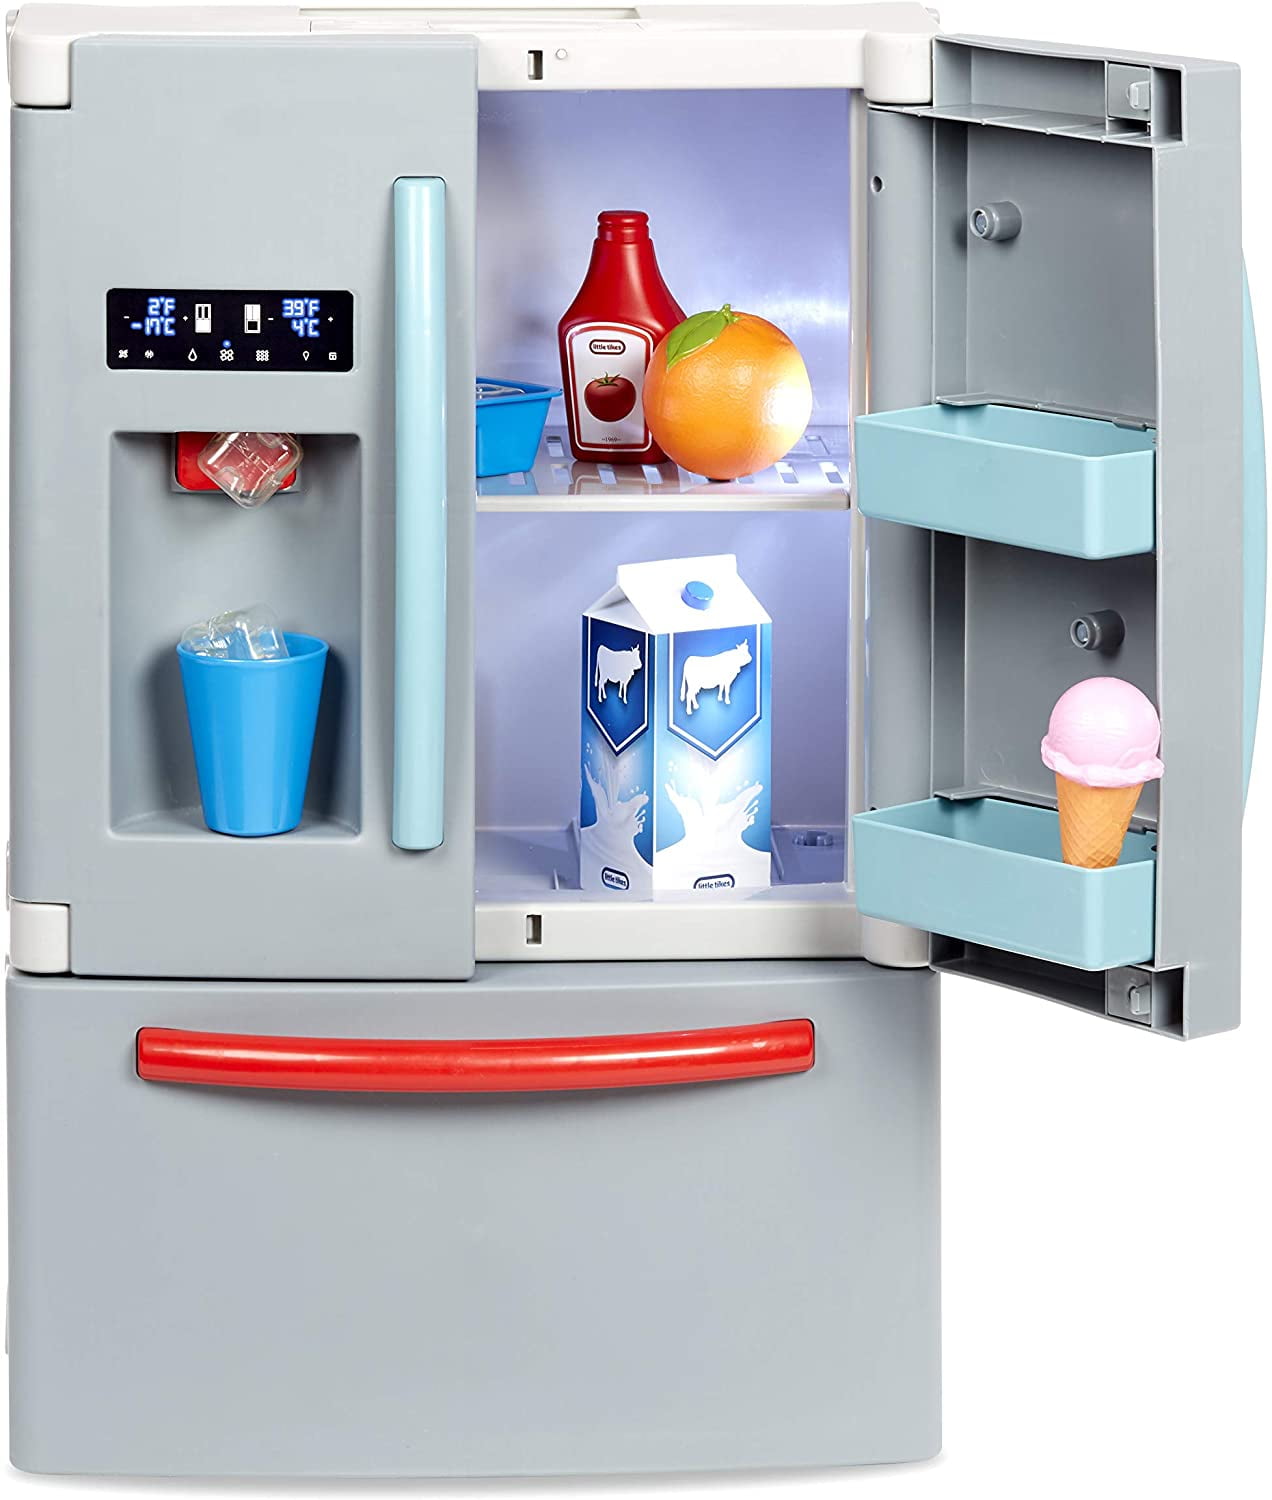 Kitchen Playset For Kids Pretend Play Refrigerator Oven Toy Cooking Set Toddler 